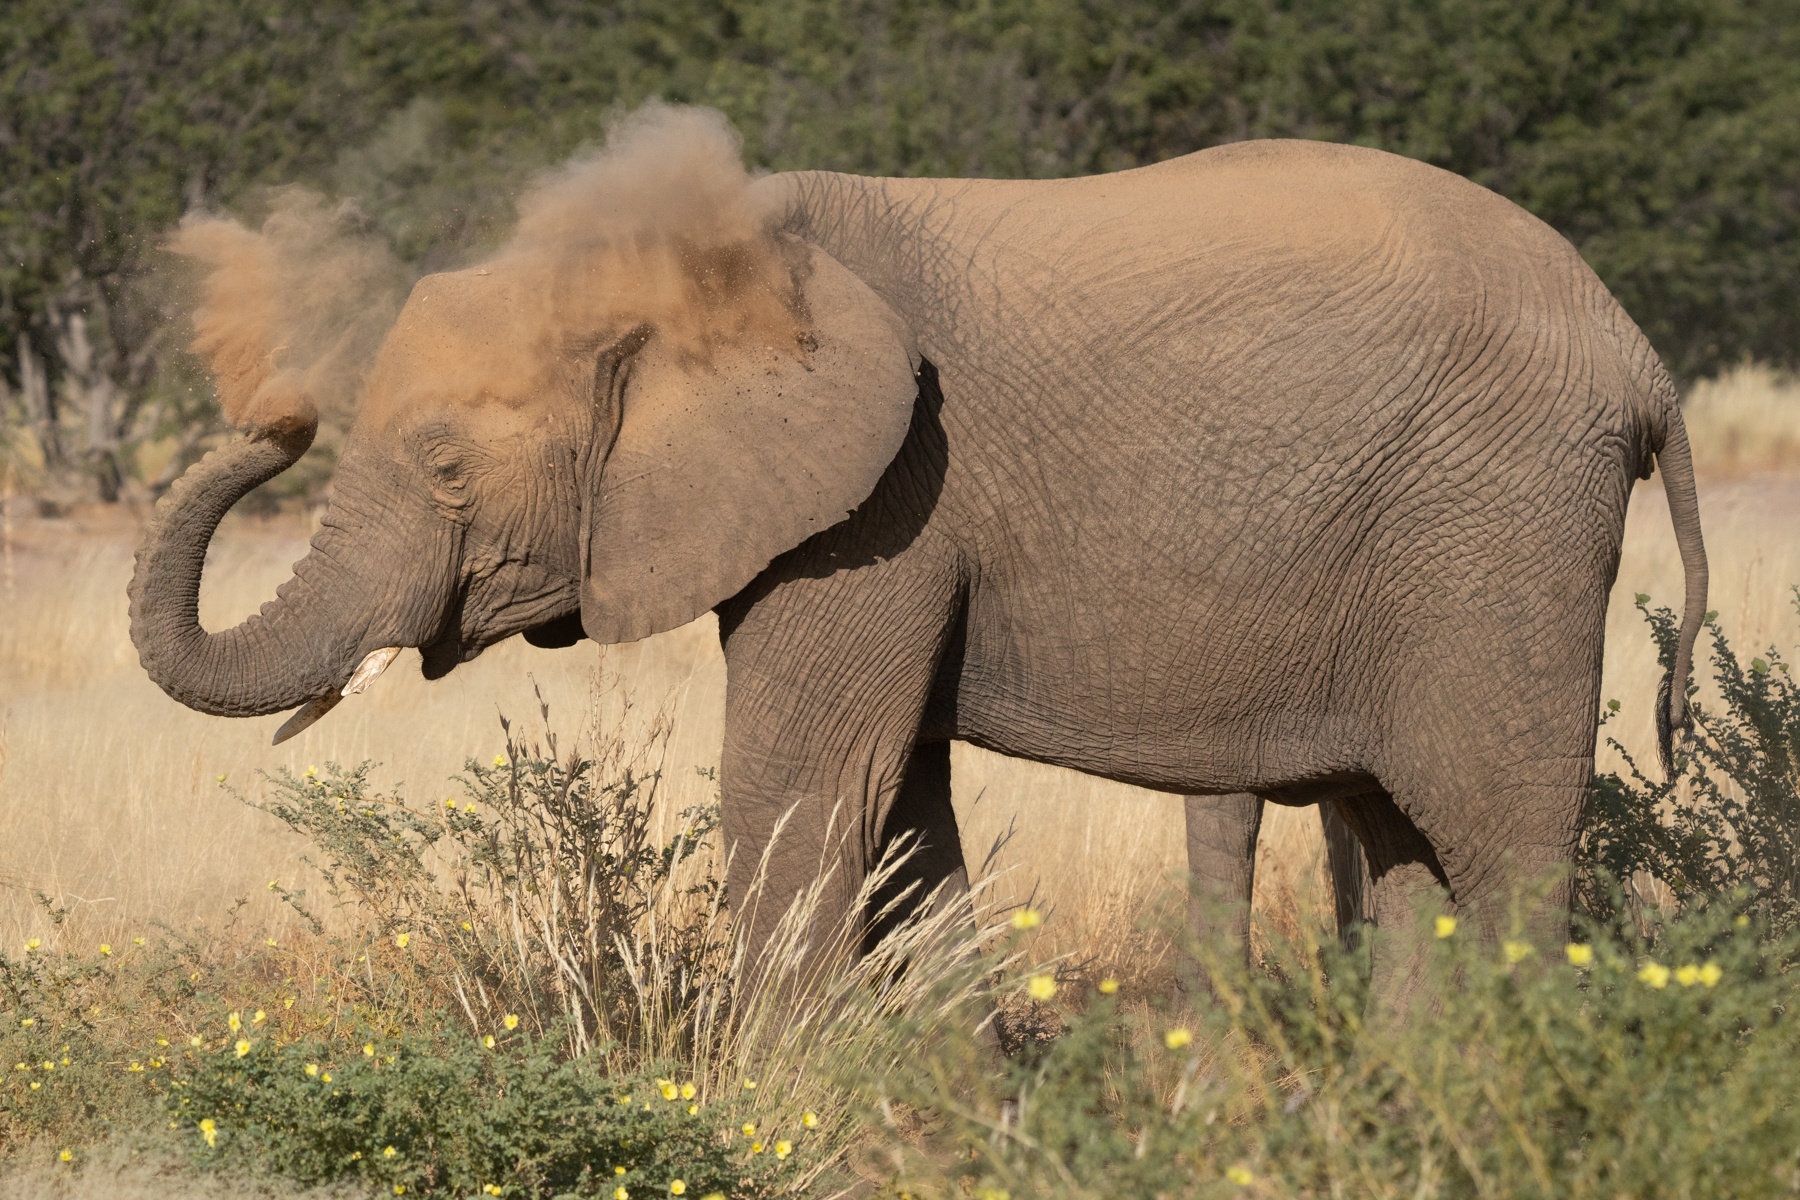 A dust bathing desert elephant on our wildlife photography tour in remote Namibia